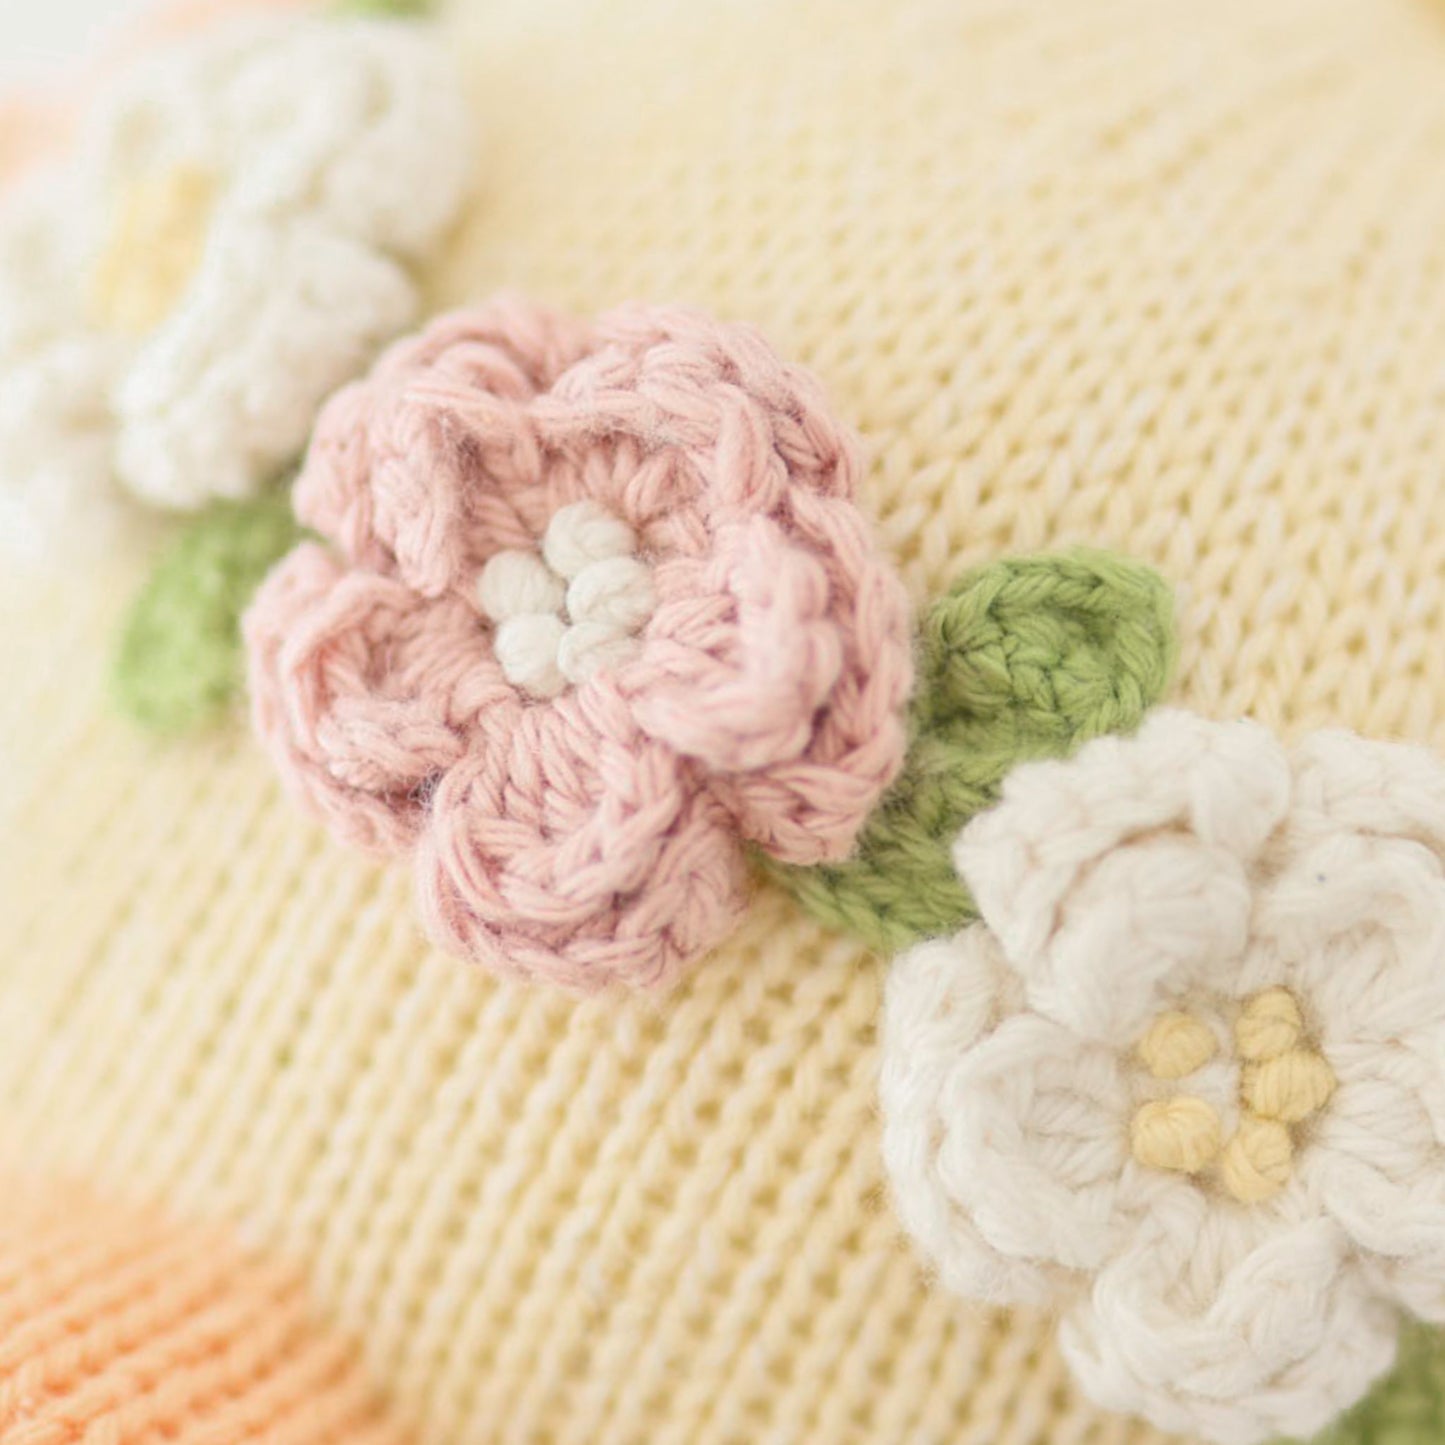 A close-up showing the hand-knit details on Flora’s flower crown.